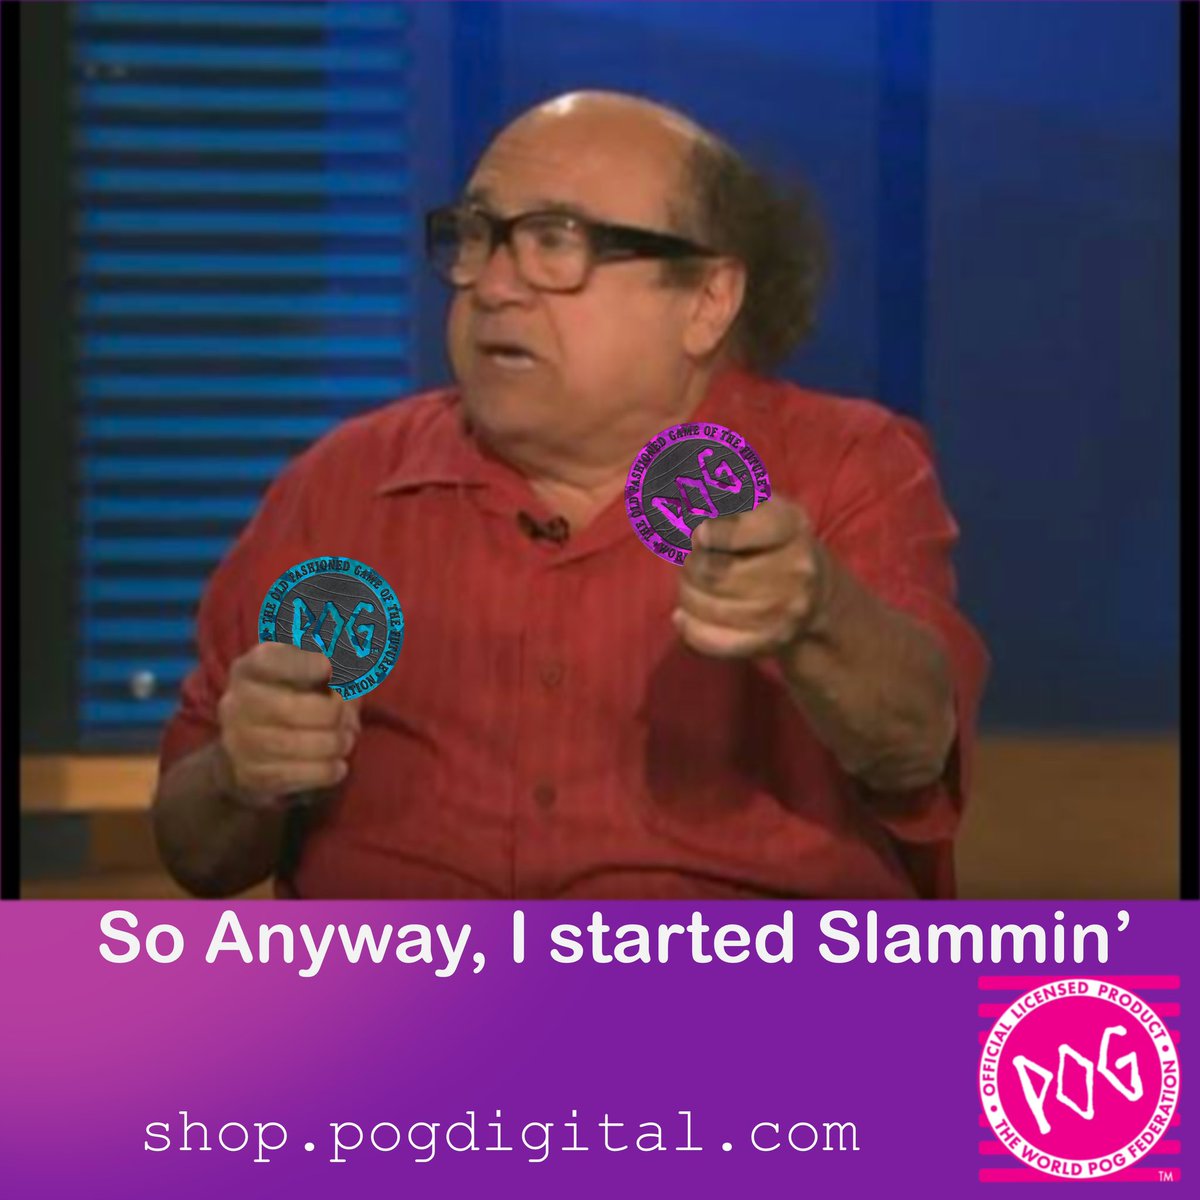 the gang wagered a little game of play for keeps. Frank knew what to do. 

#itsalwayssunnyinphiladelphia #frank #dannydevito #pog #pogs #slammers